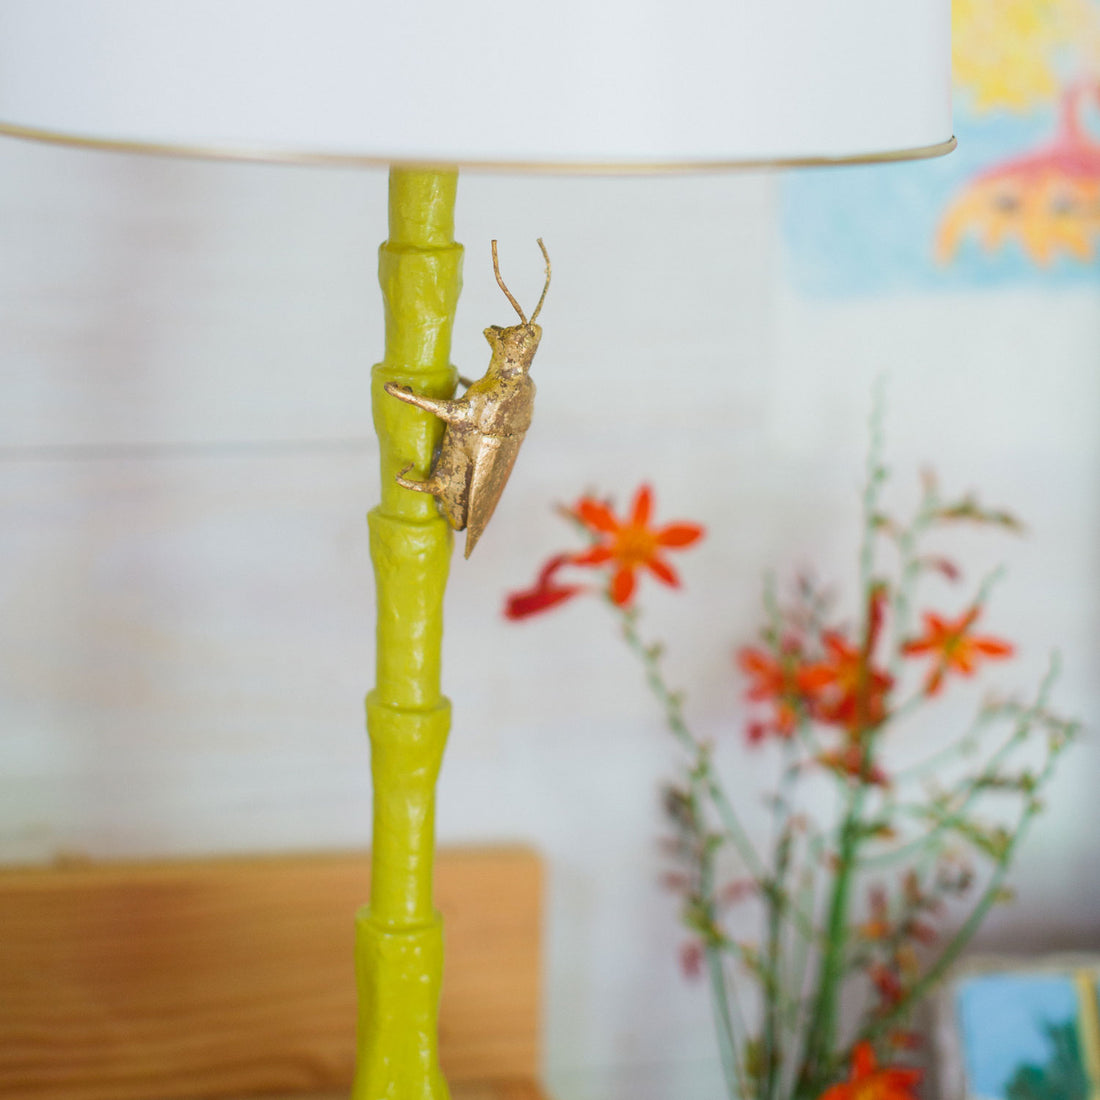 Gold Bug Lamp is handmade from paper mache and has a matal shade